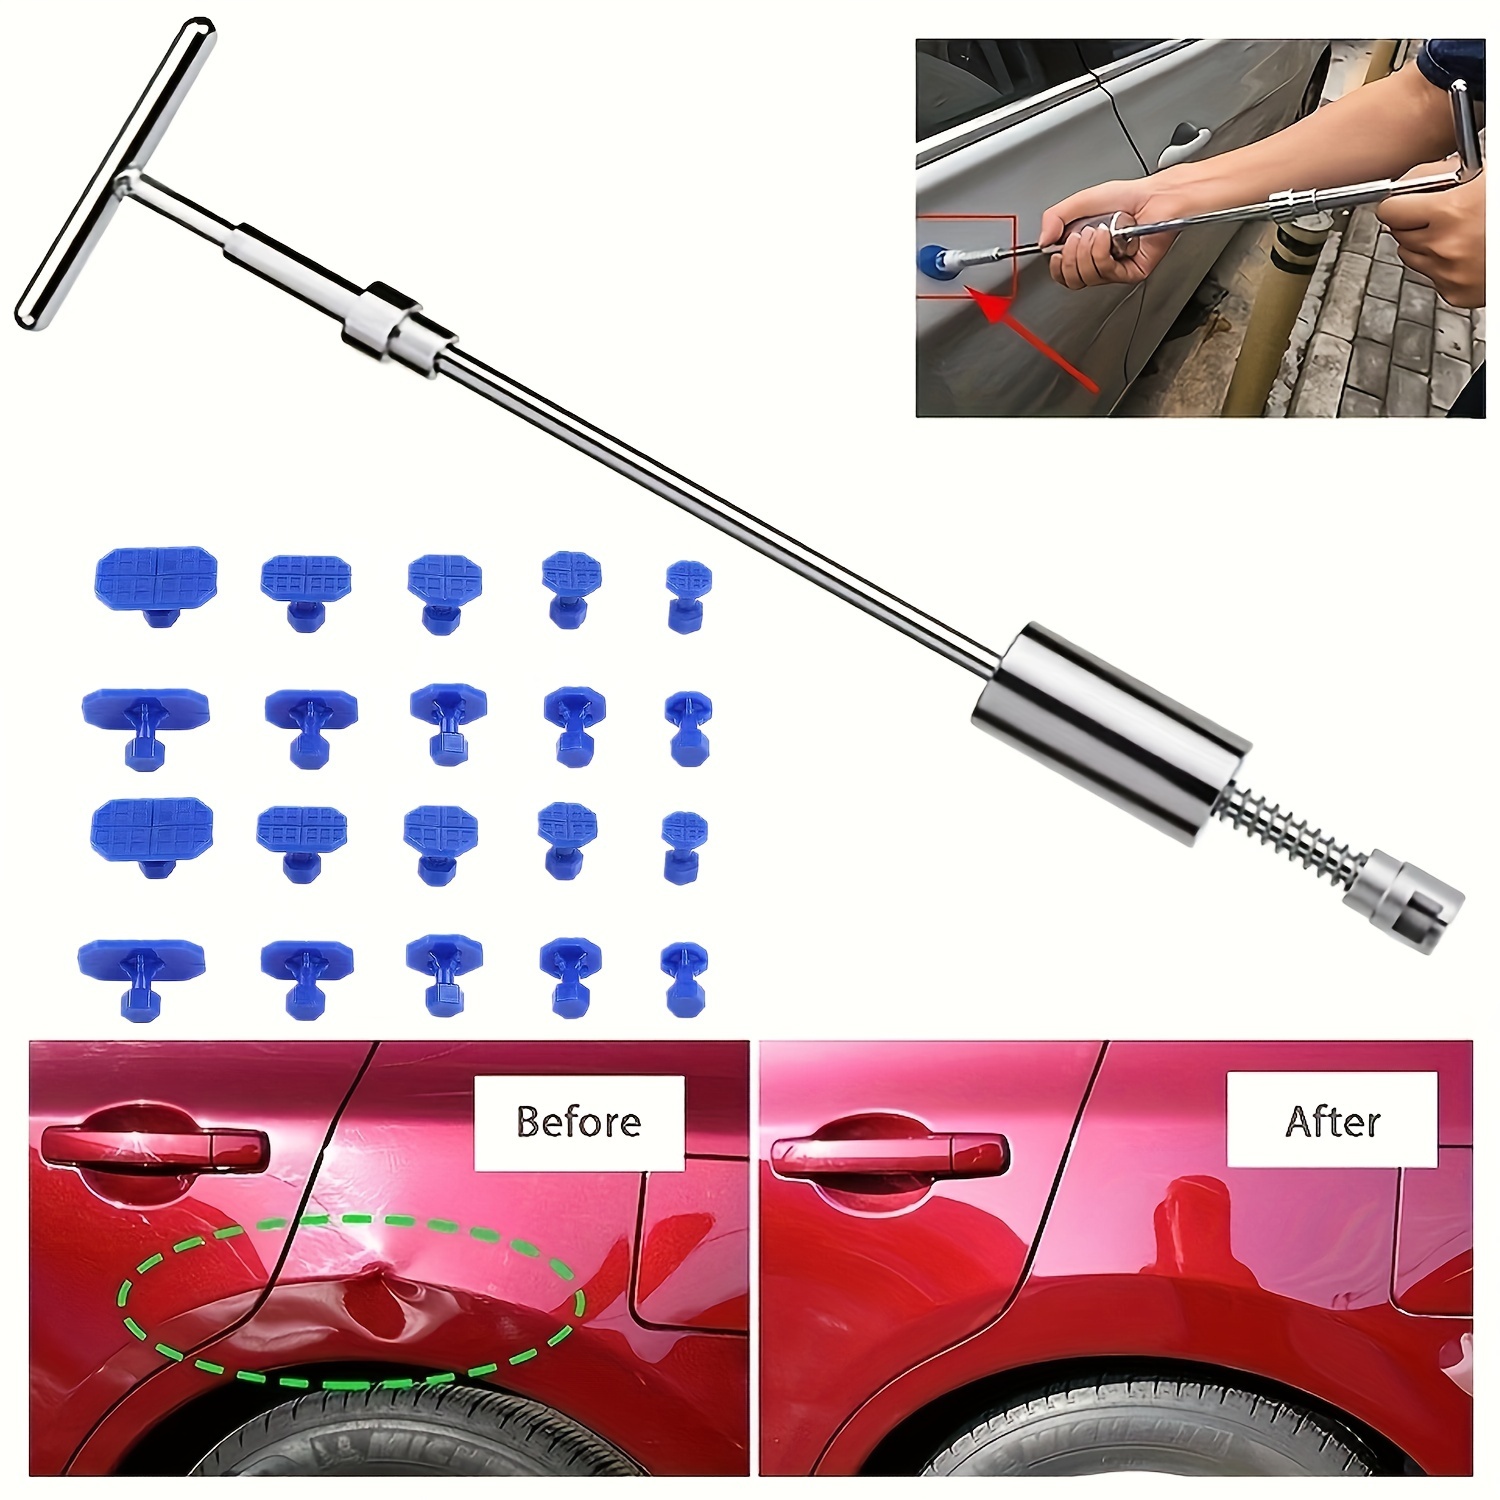 

Car Dent Repair Kit - Get Professional Results With Our Metal T-handle Puller And Plastic Glue Tabs!(without Glue Gun)